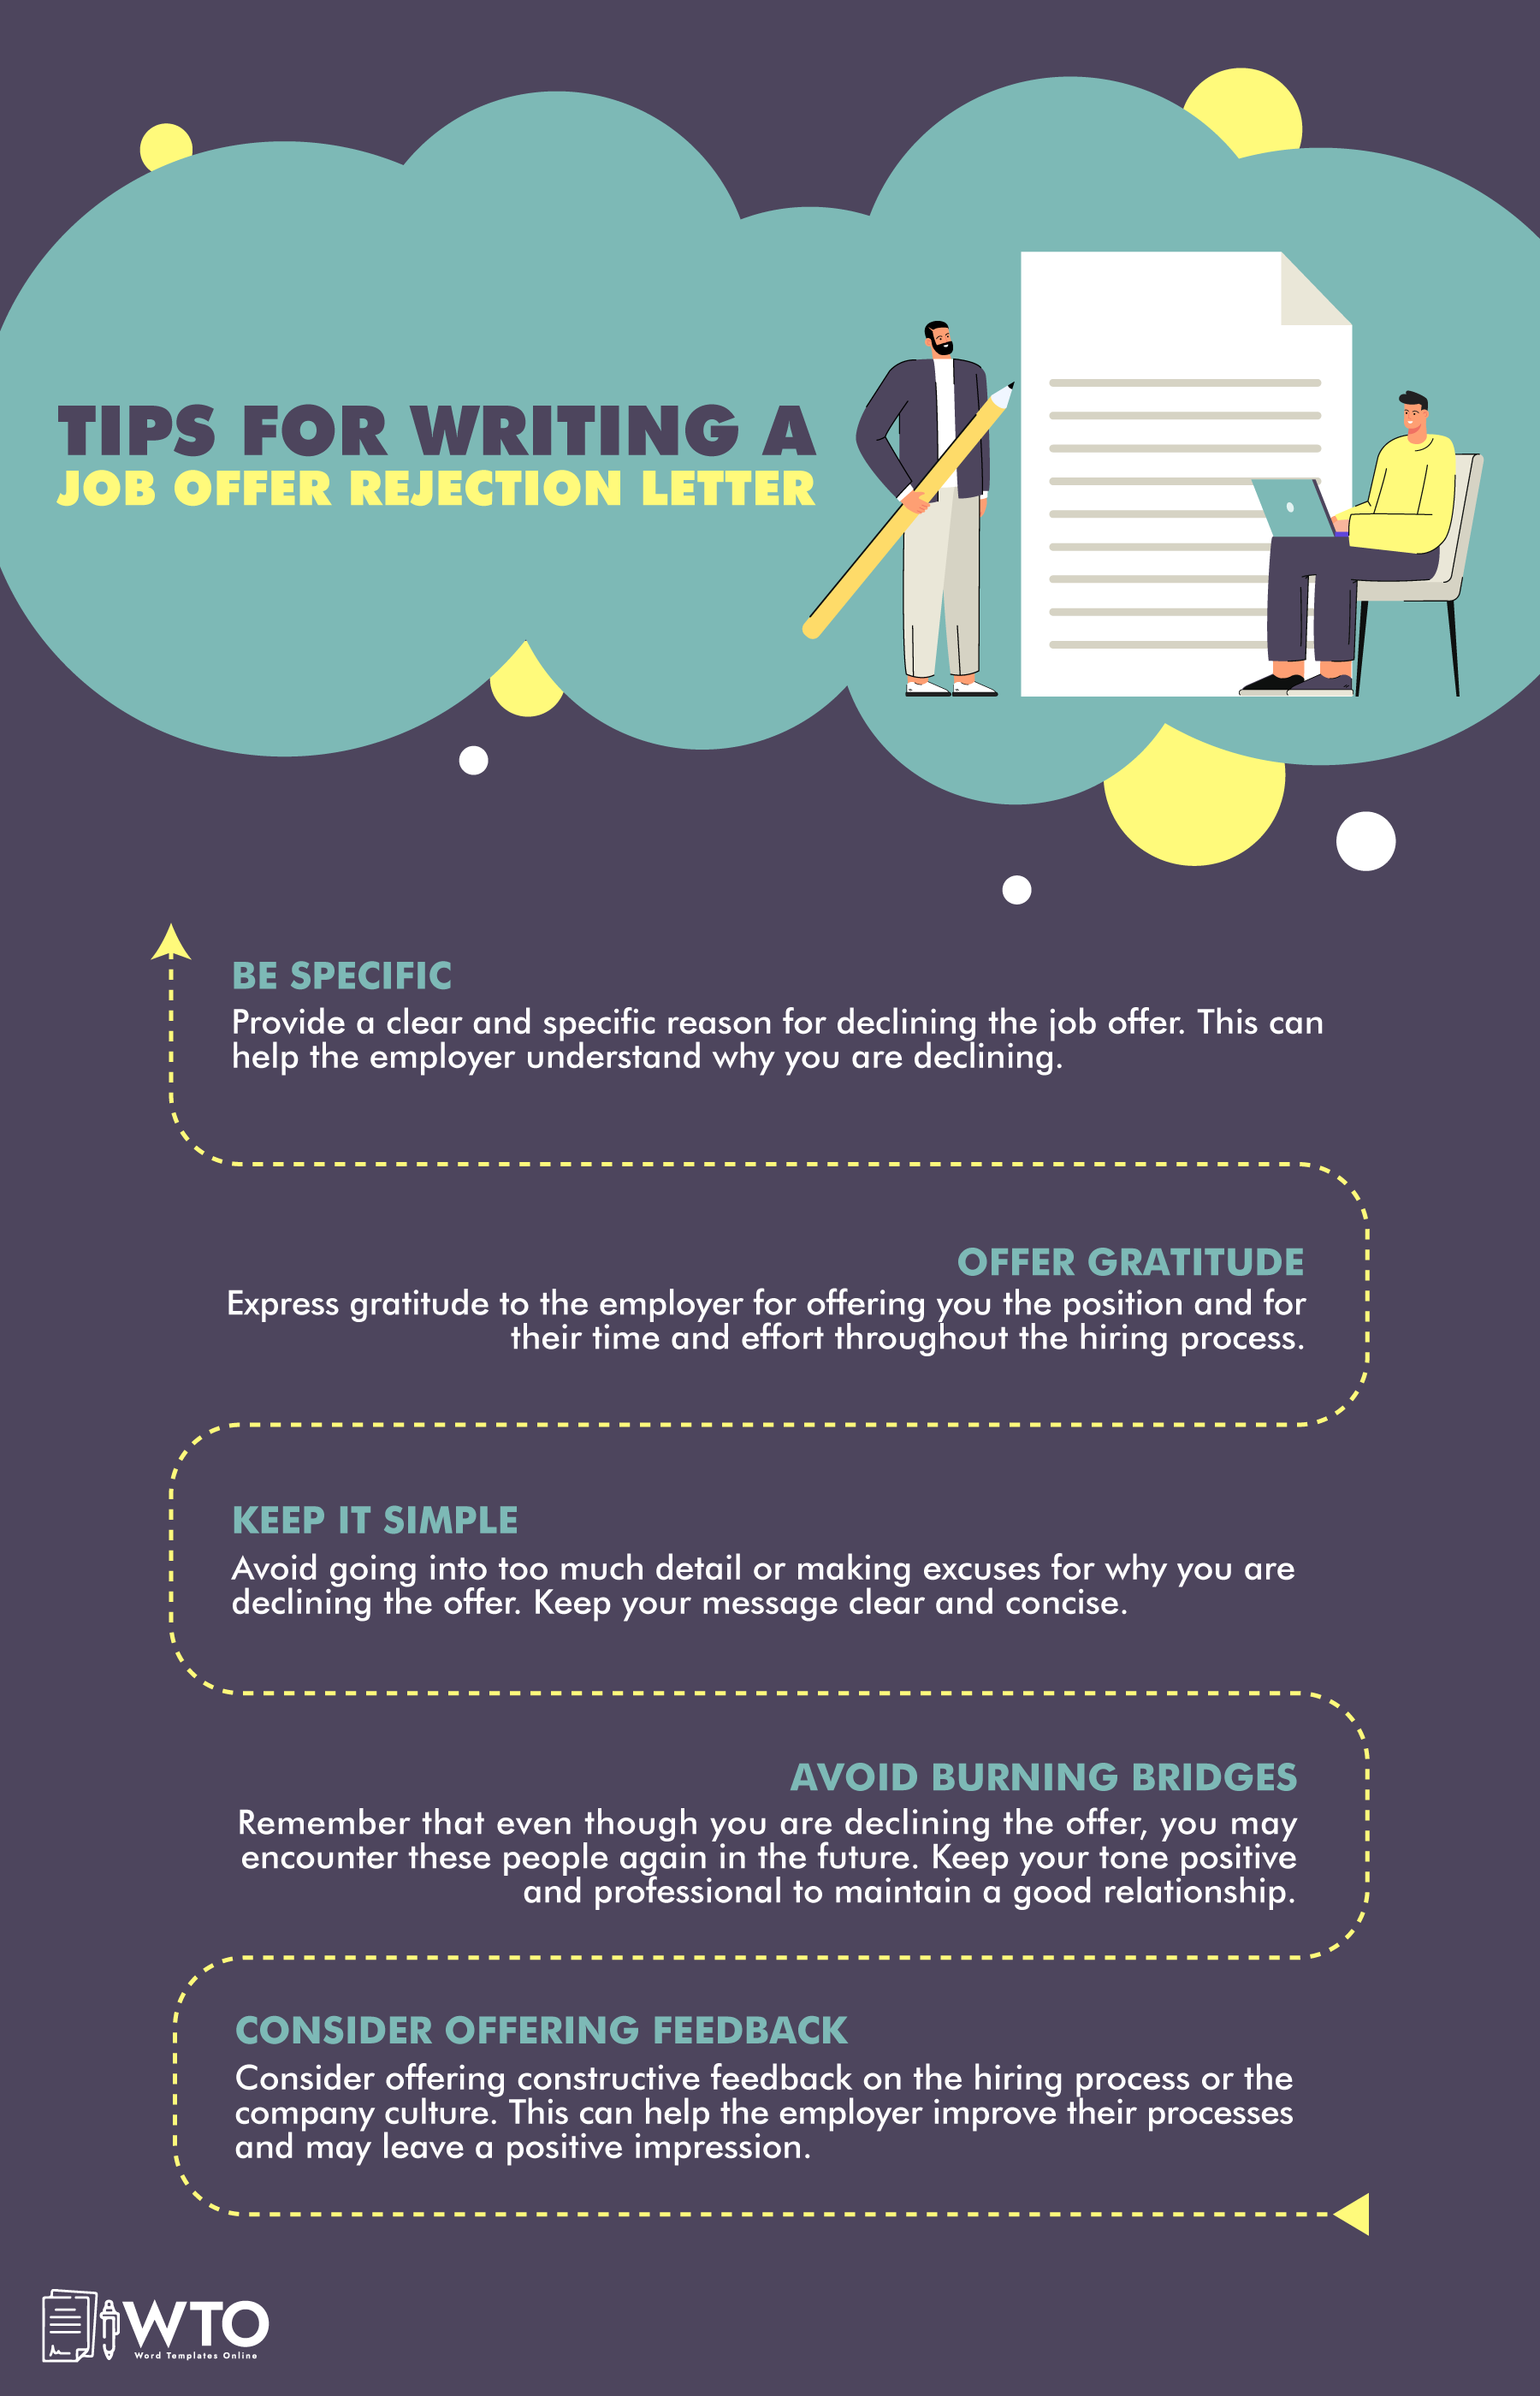 This infographic is about tips for writing job offer rejection letter.